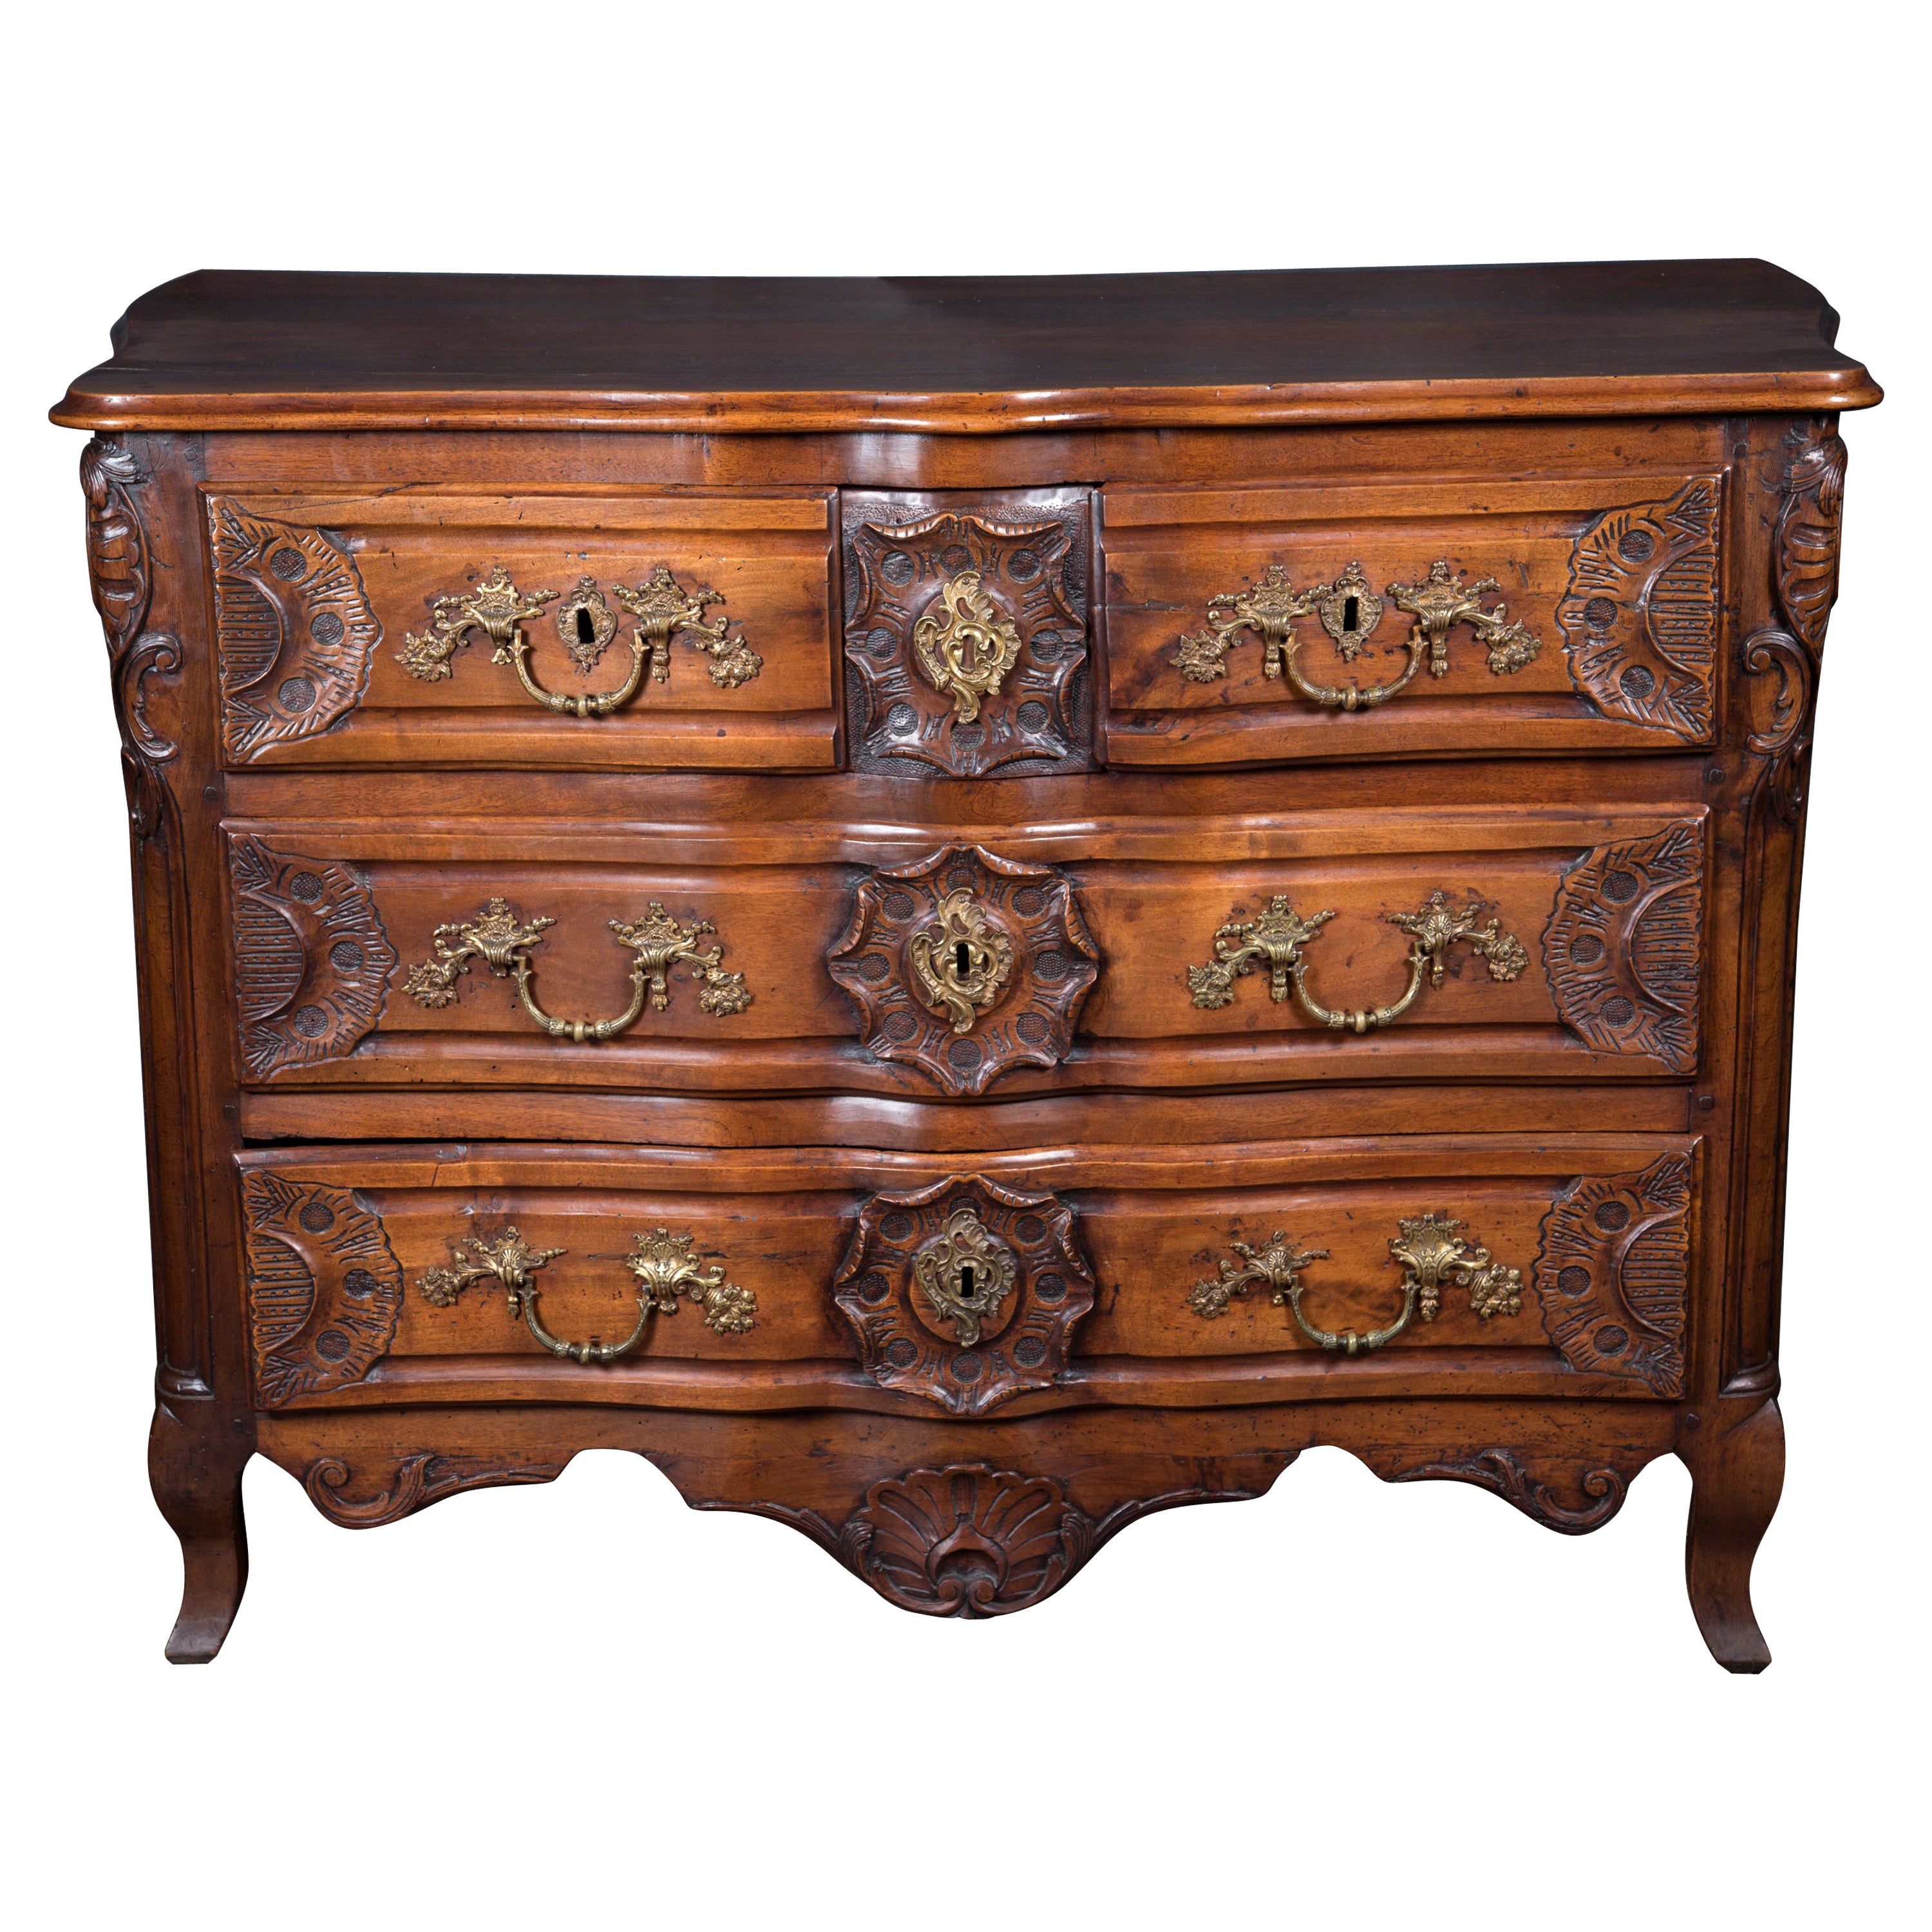 Early 18th Century Regence Period Lyonnaise Walnut Commode / Chest of Drawers